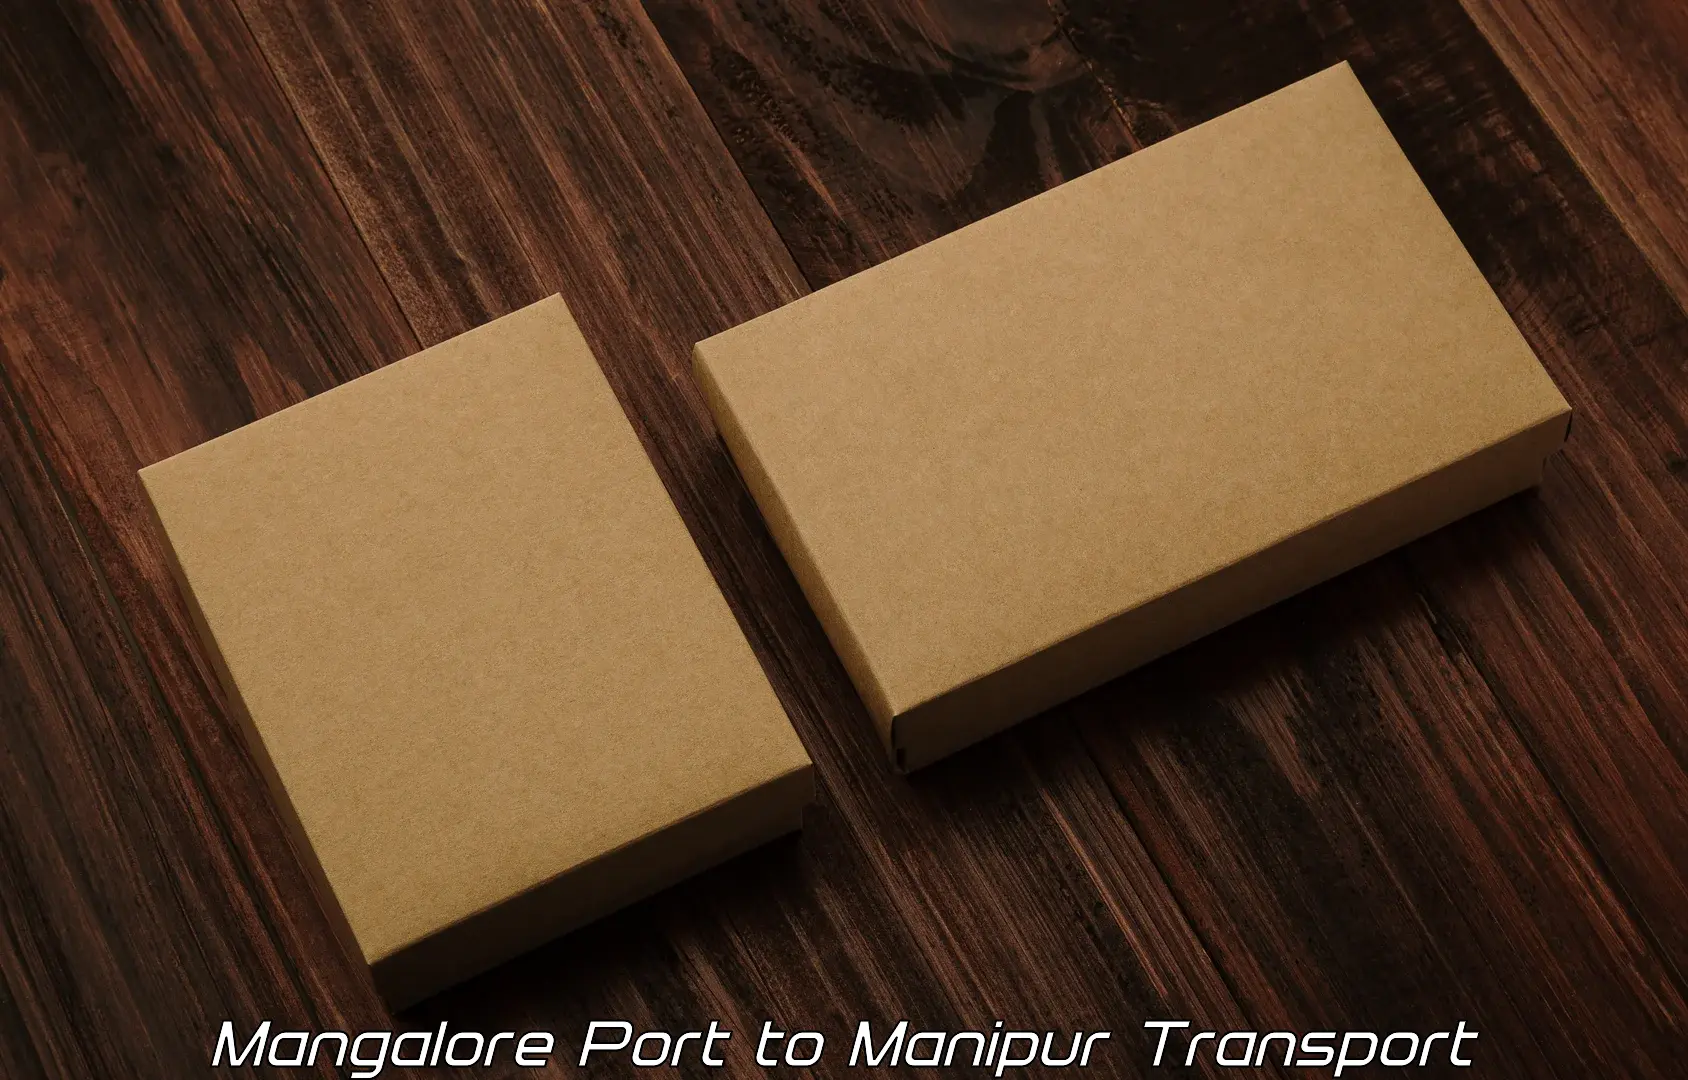 Daily transport service Mangalore Port to Manipur